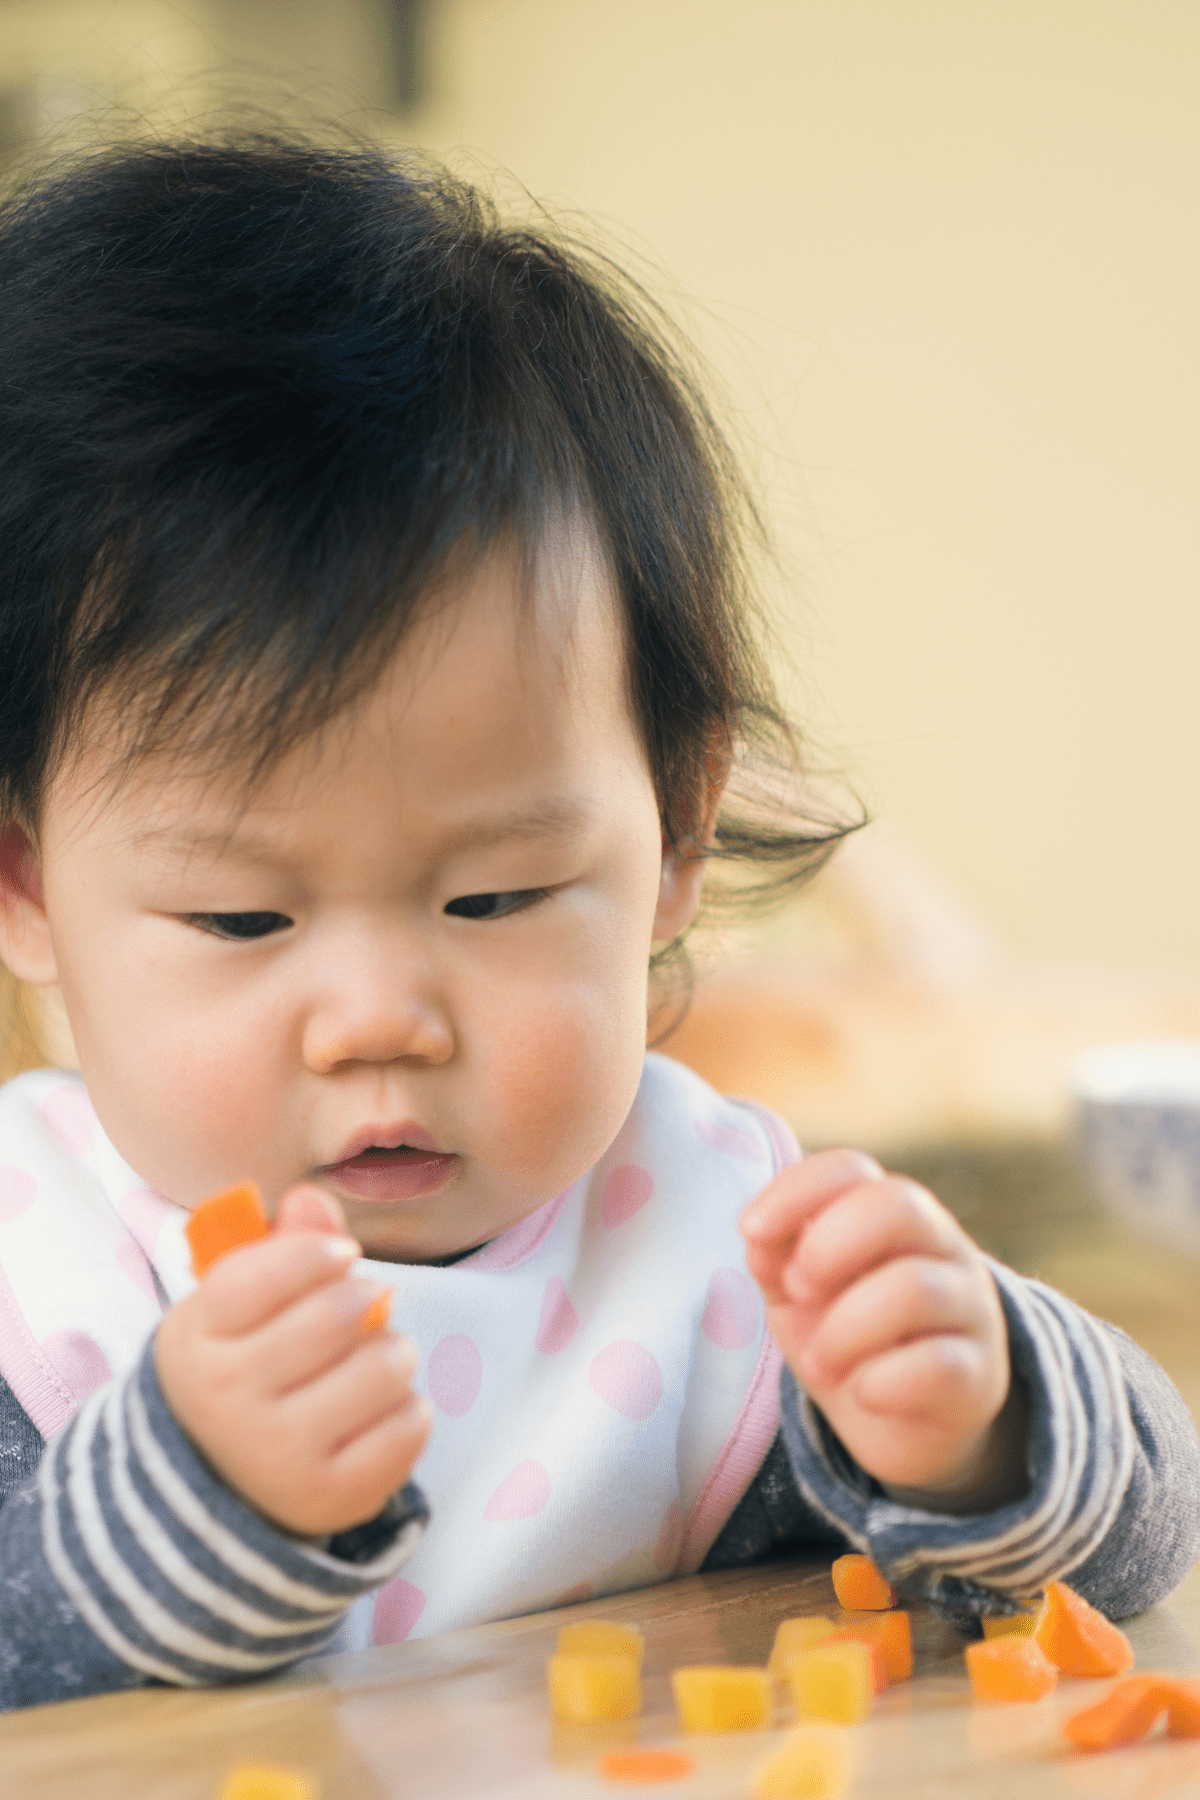 The 10 Best Vegetables For Babies 6-12 Months Old